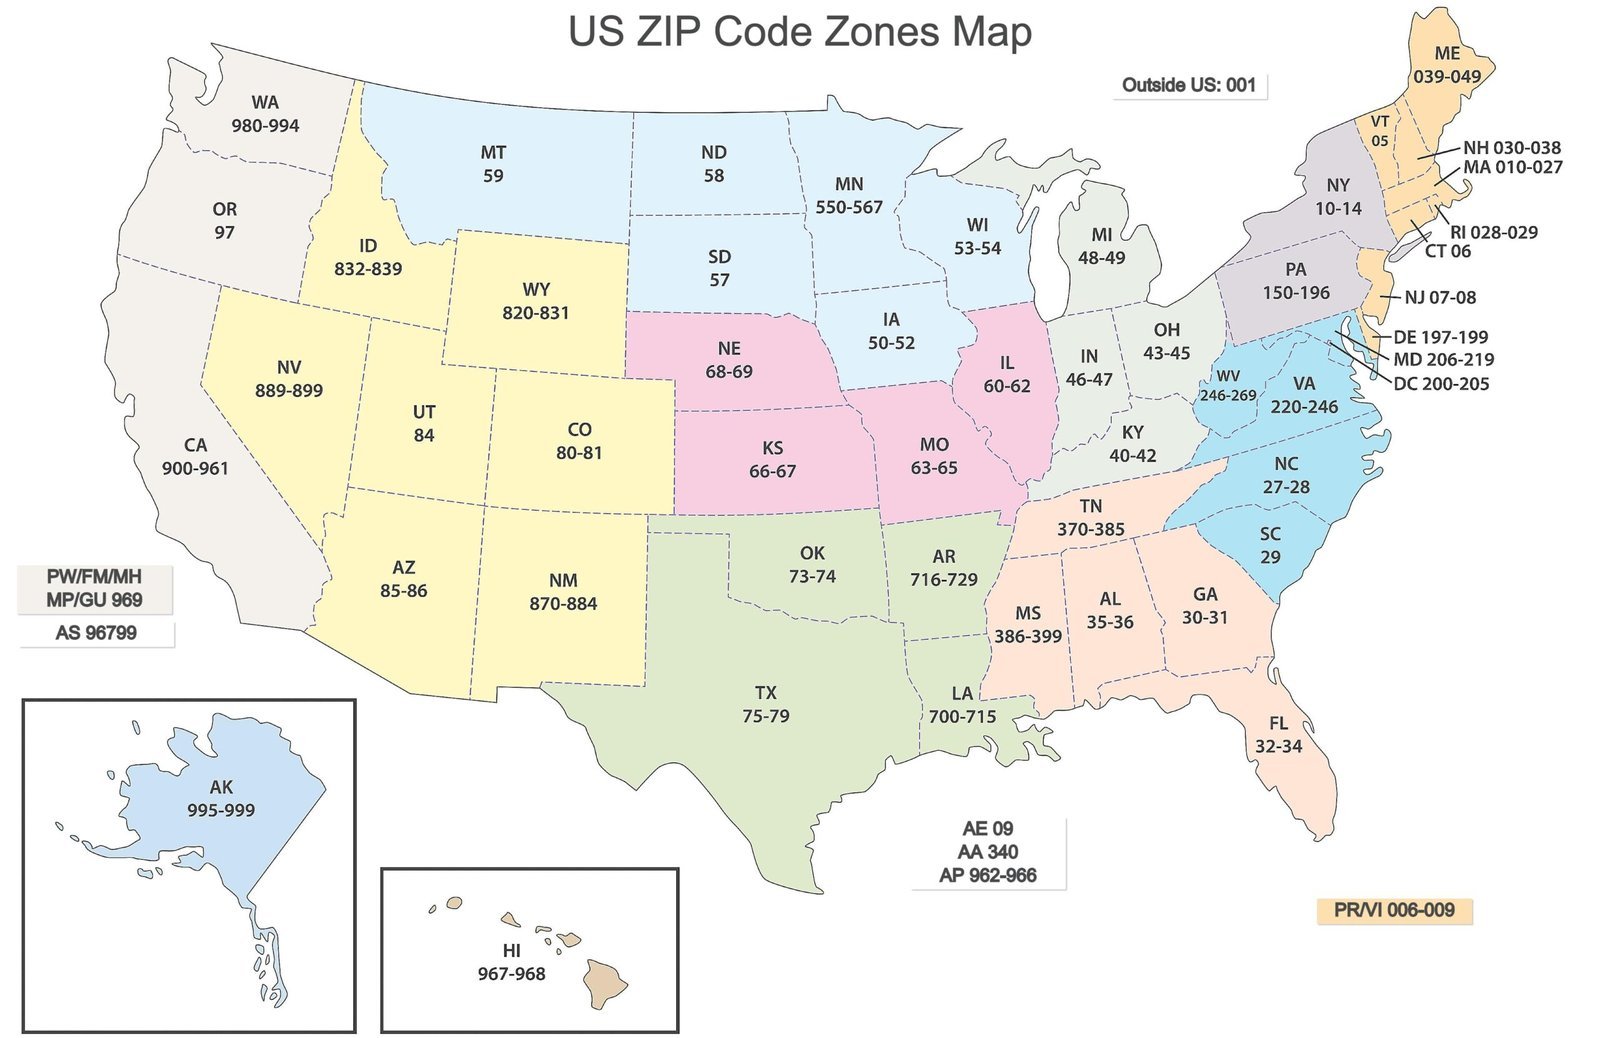 The Ultimate Guide: How to Search for Postal Codes